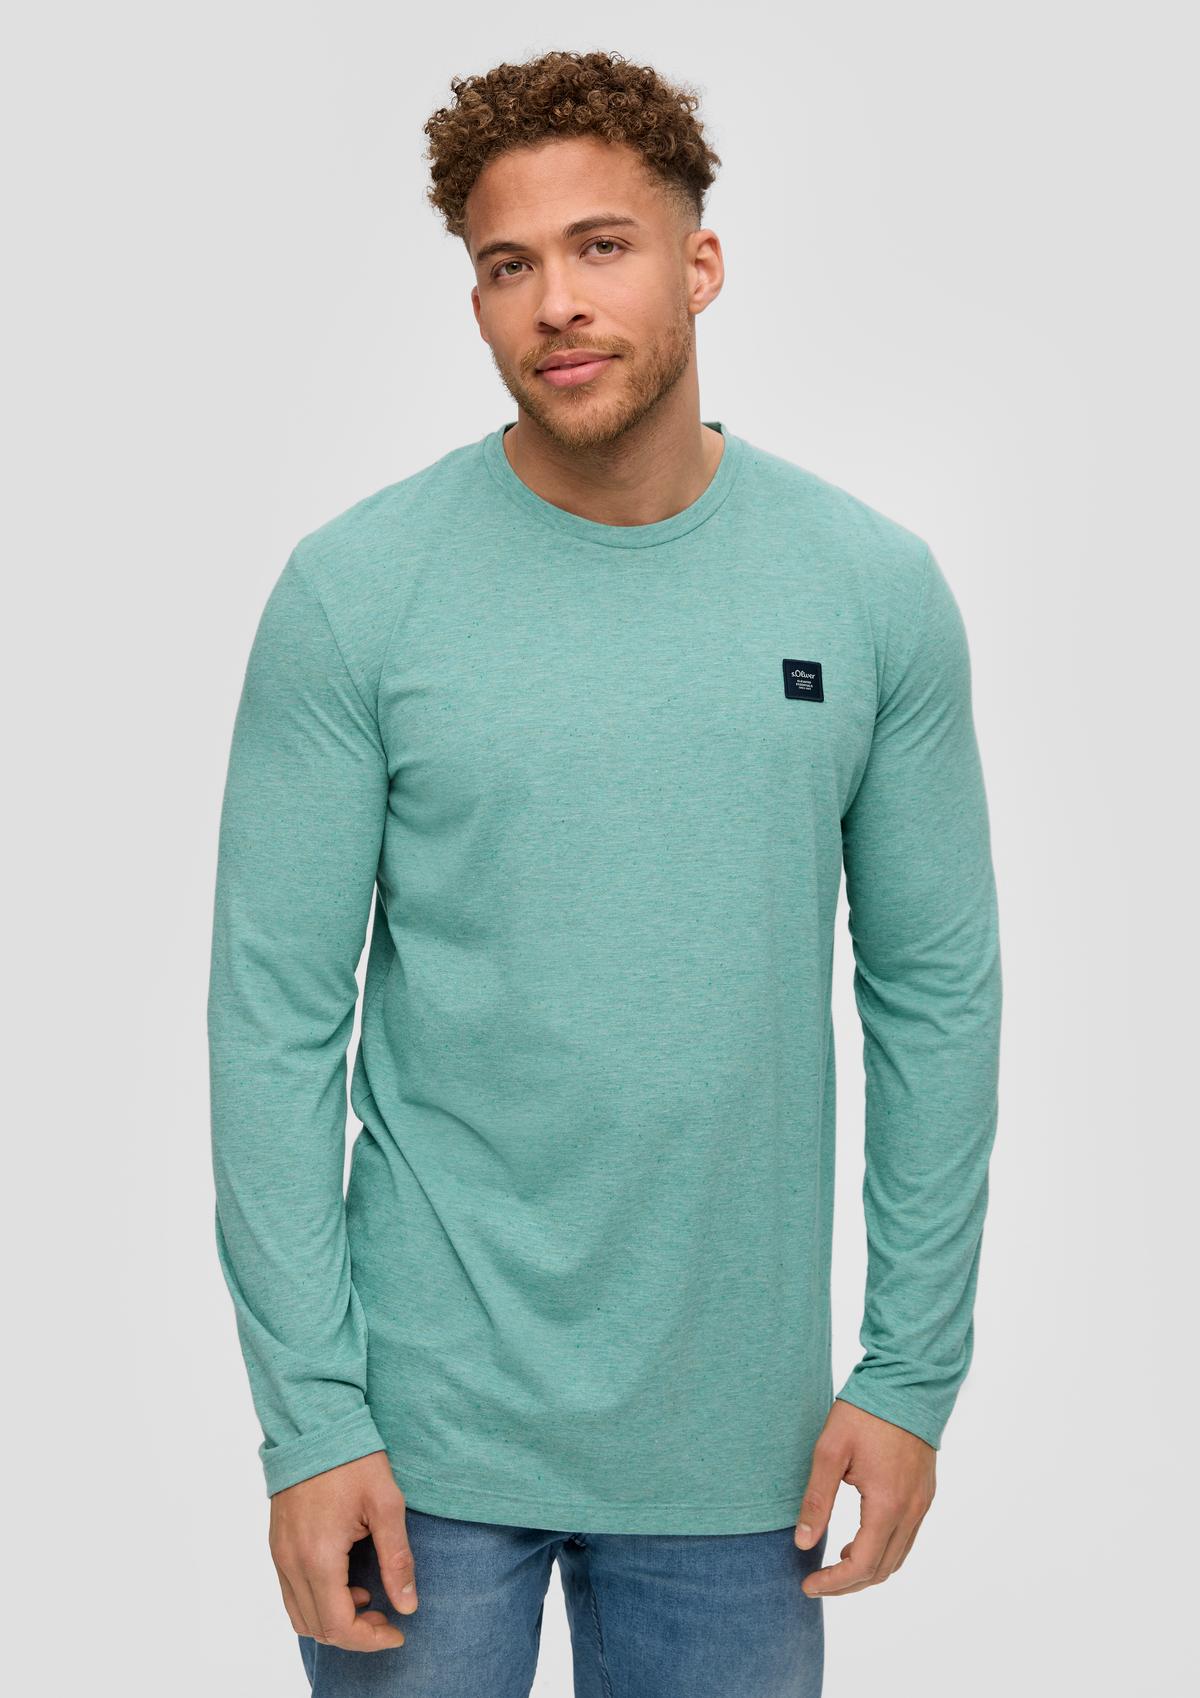 Long sleeve sage with green rolled hem - a top